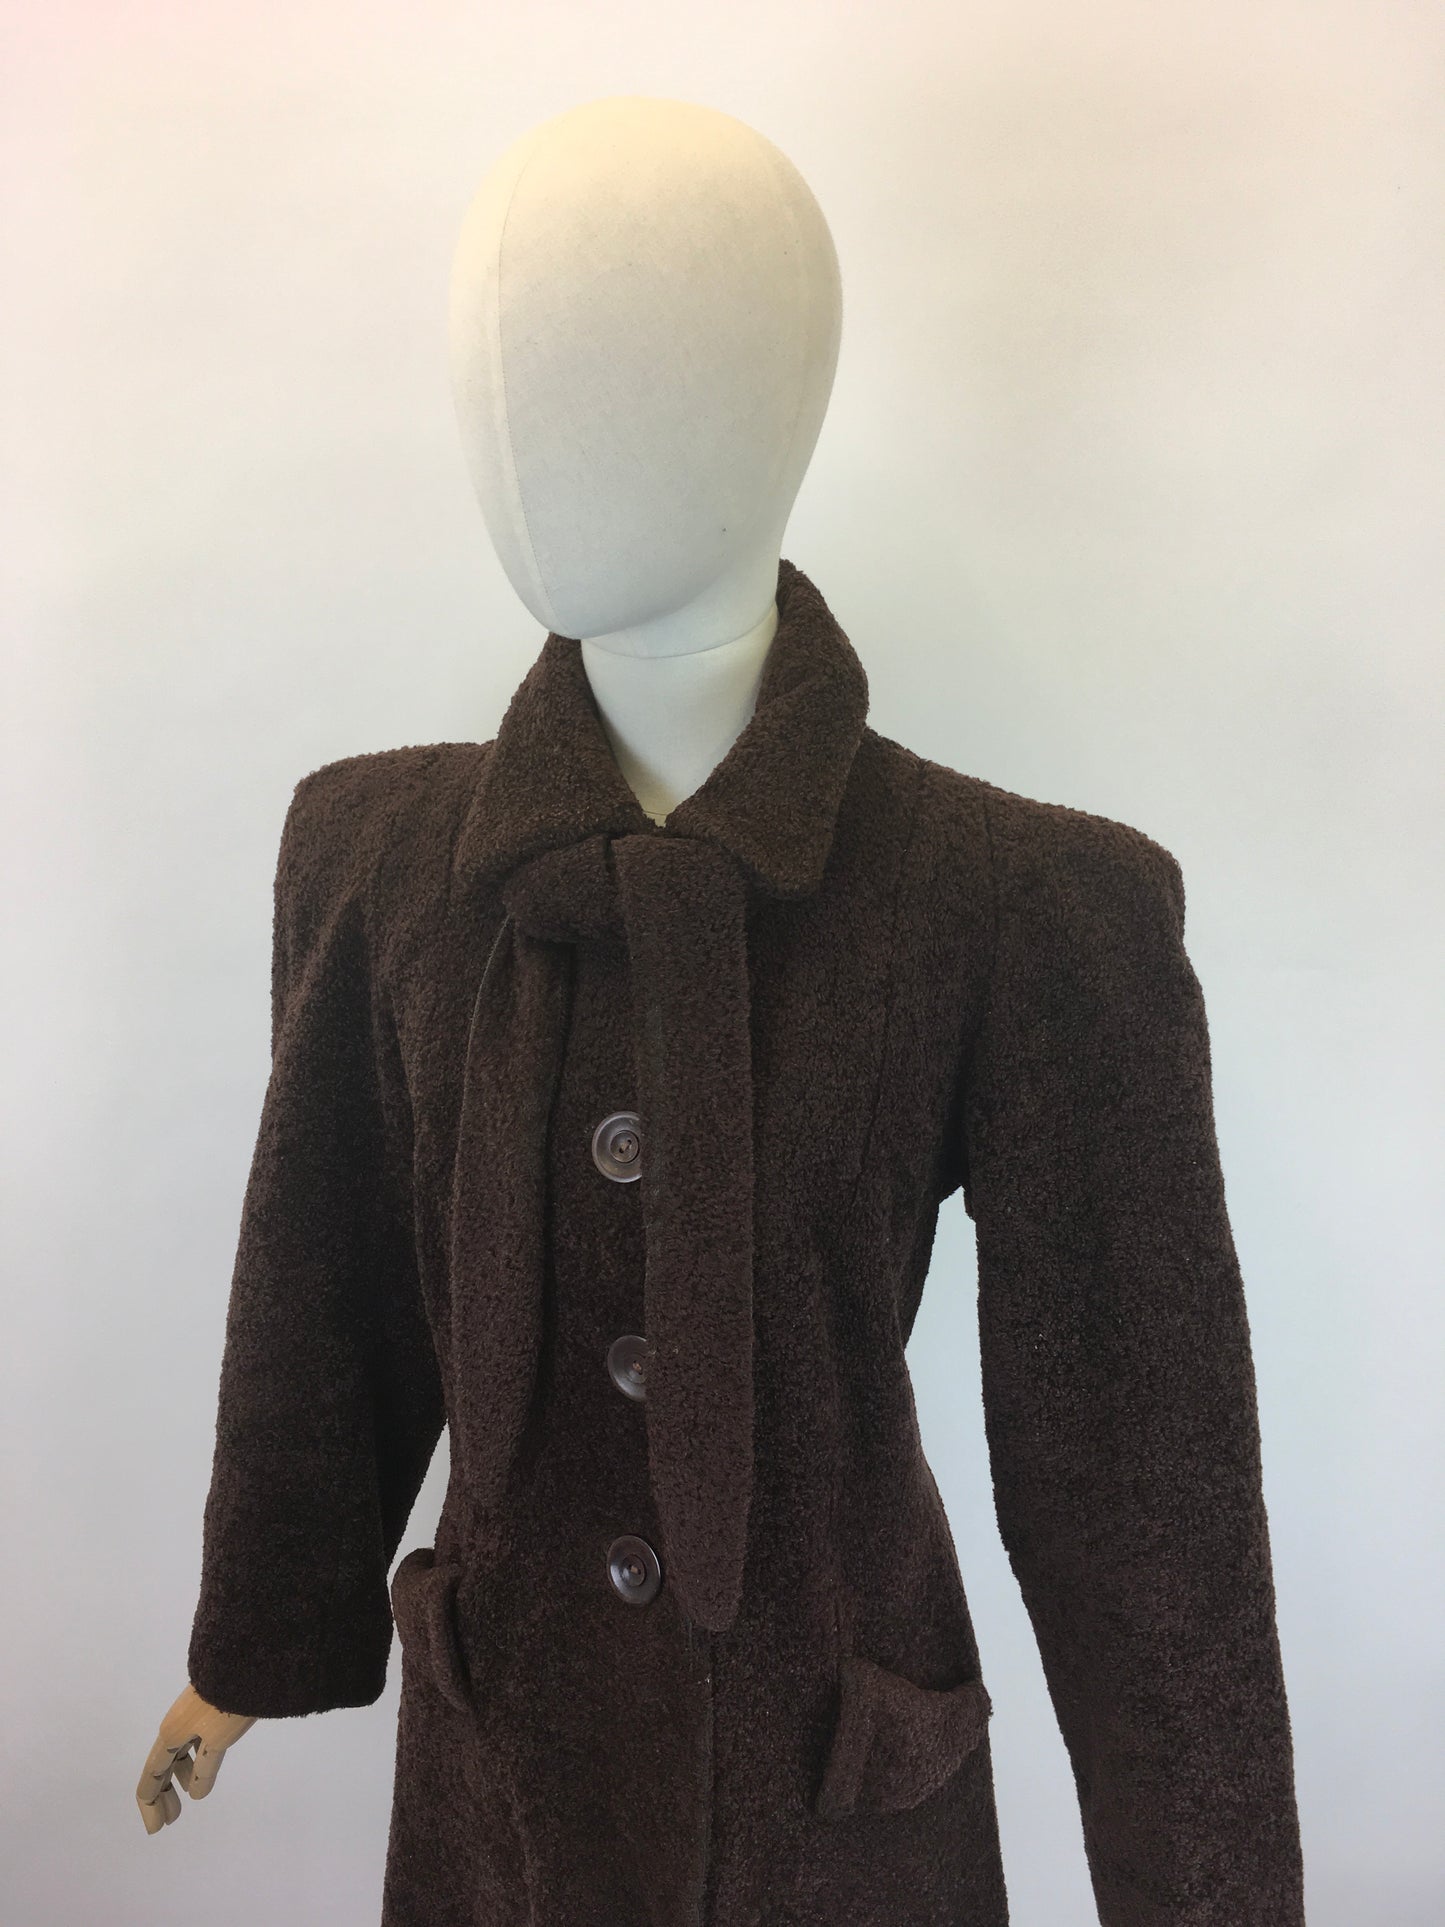 Original 1940’s Stunning Faux Fur Coat - With Matching Scarf in Dark Brown